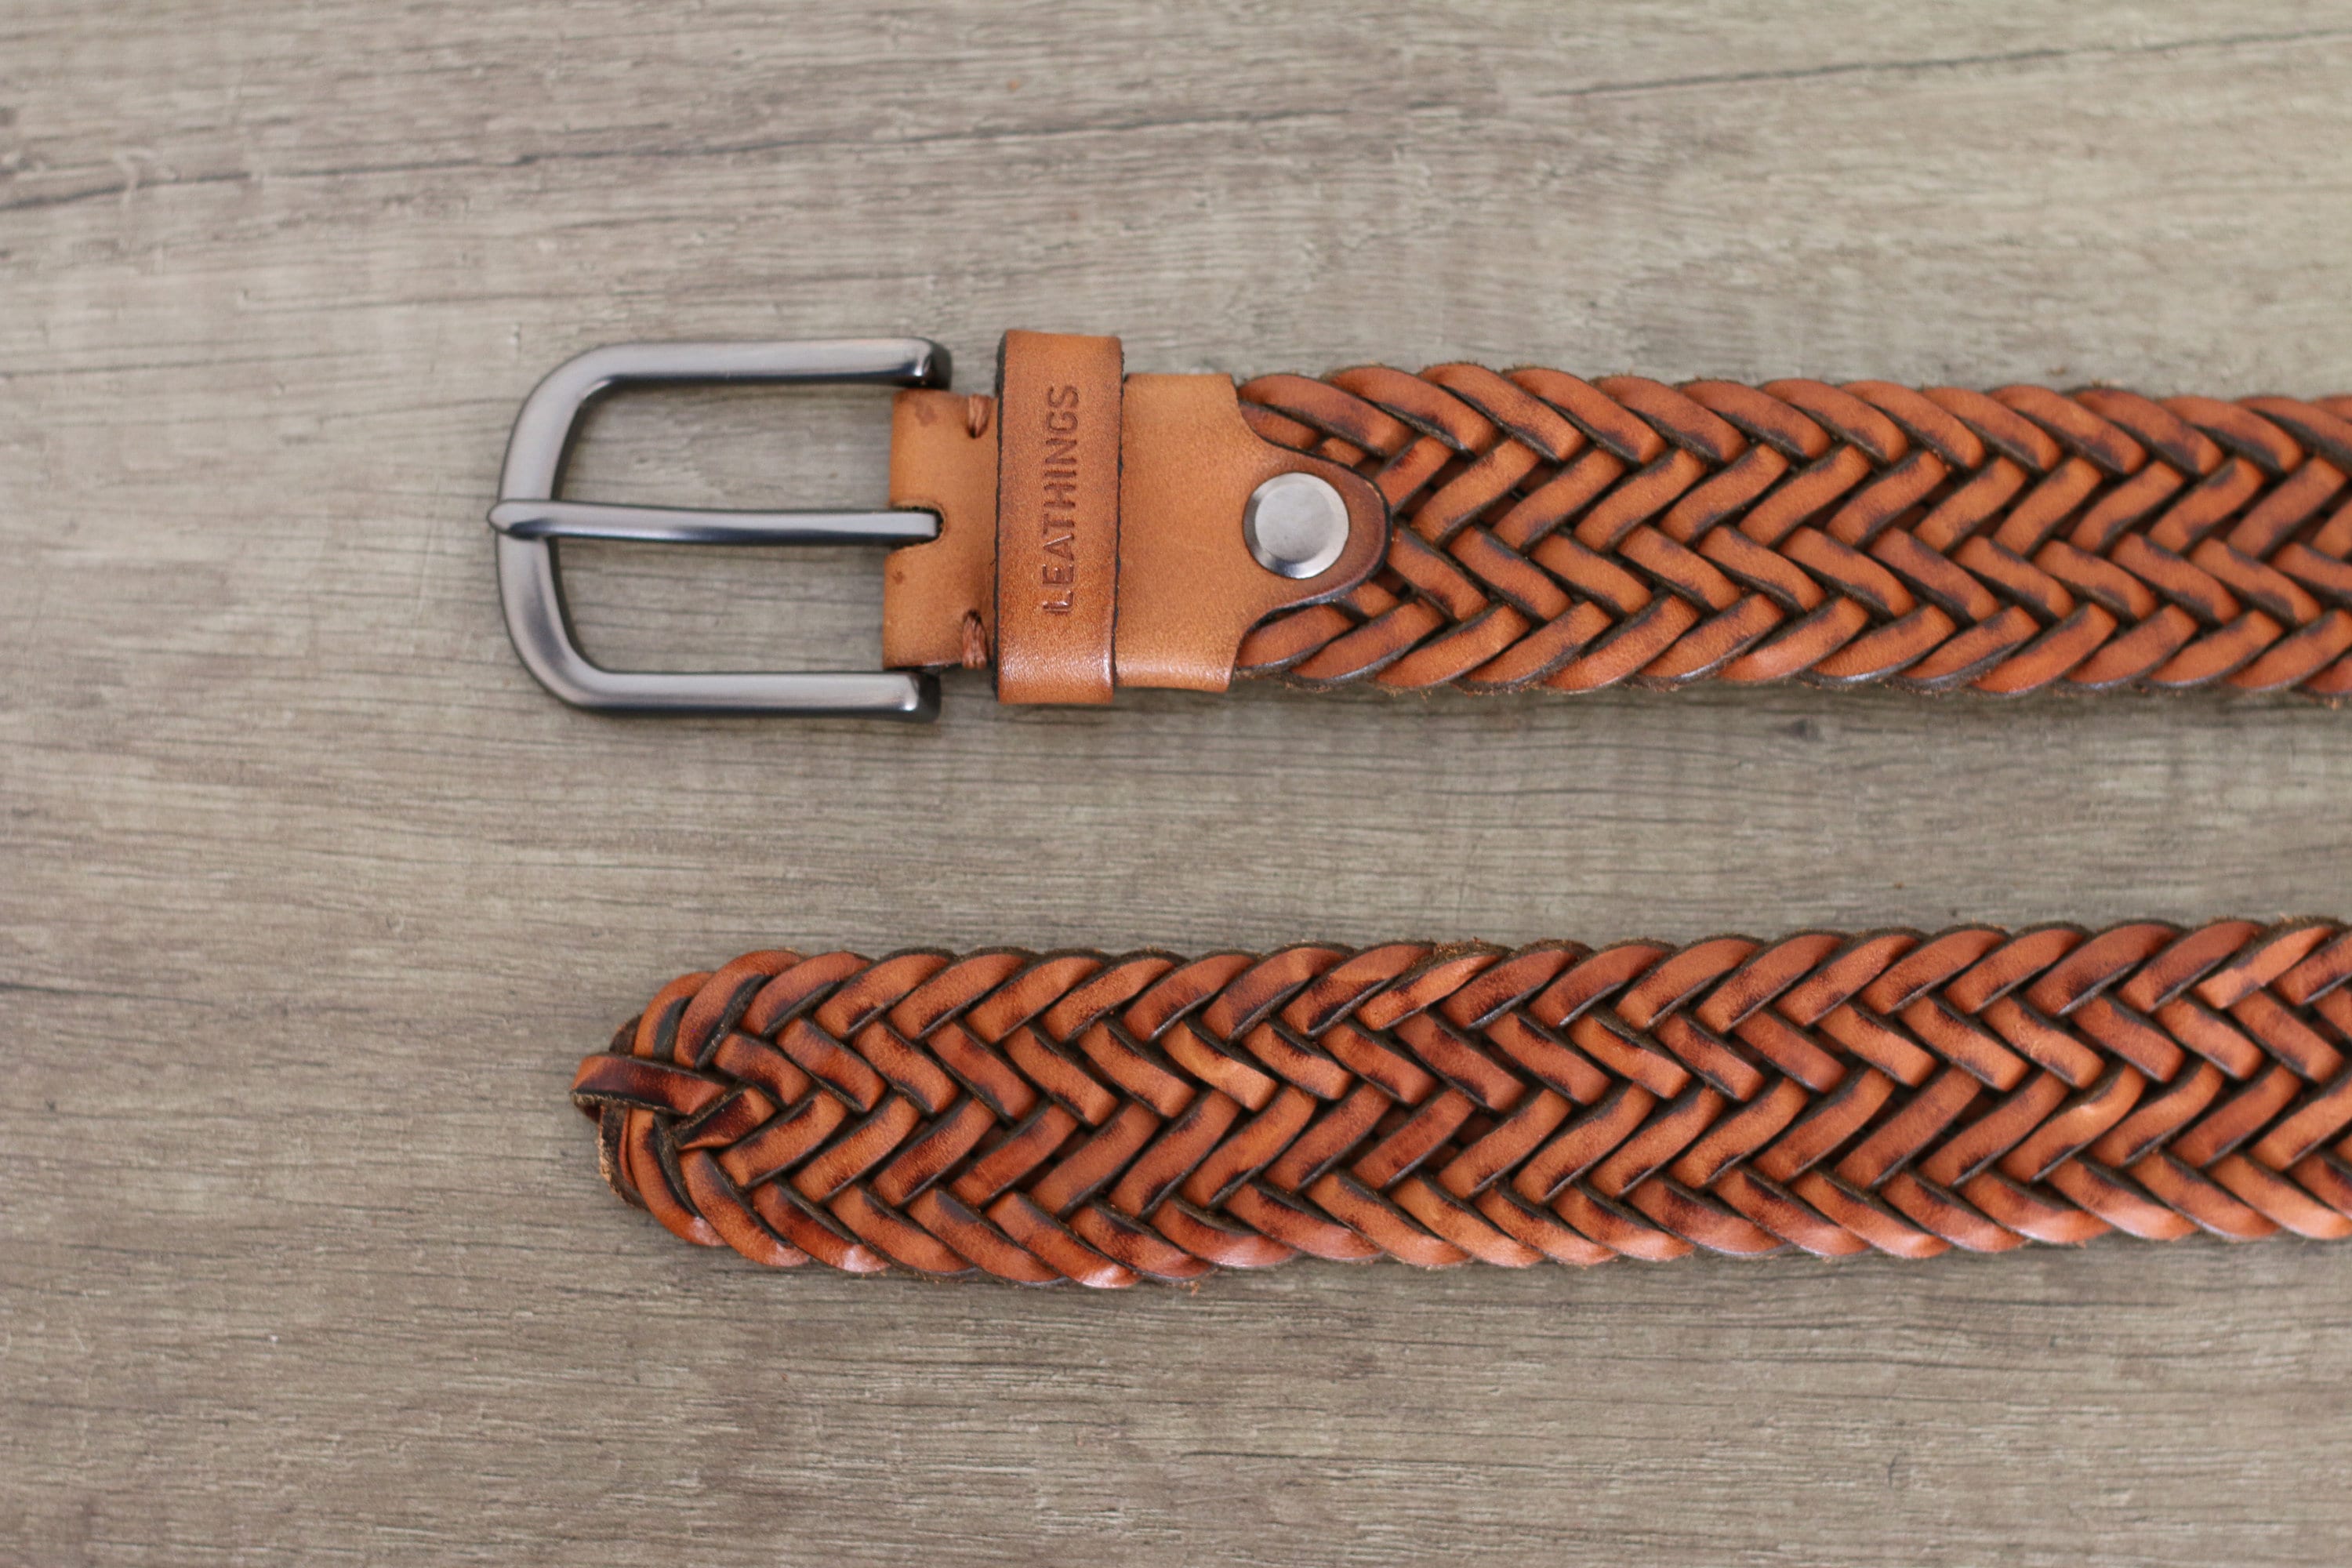 Braided Tan Leather Belt Handcrafted Vegetabled Leather Belts - Etsy